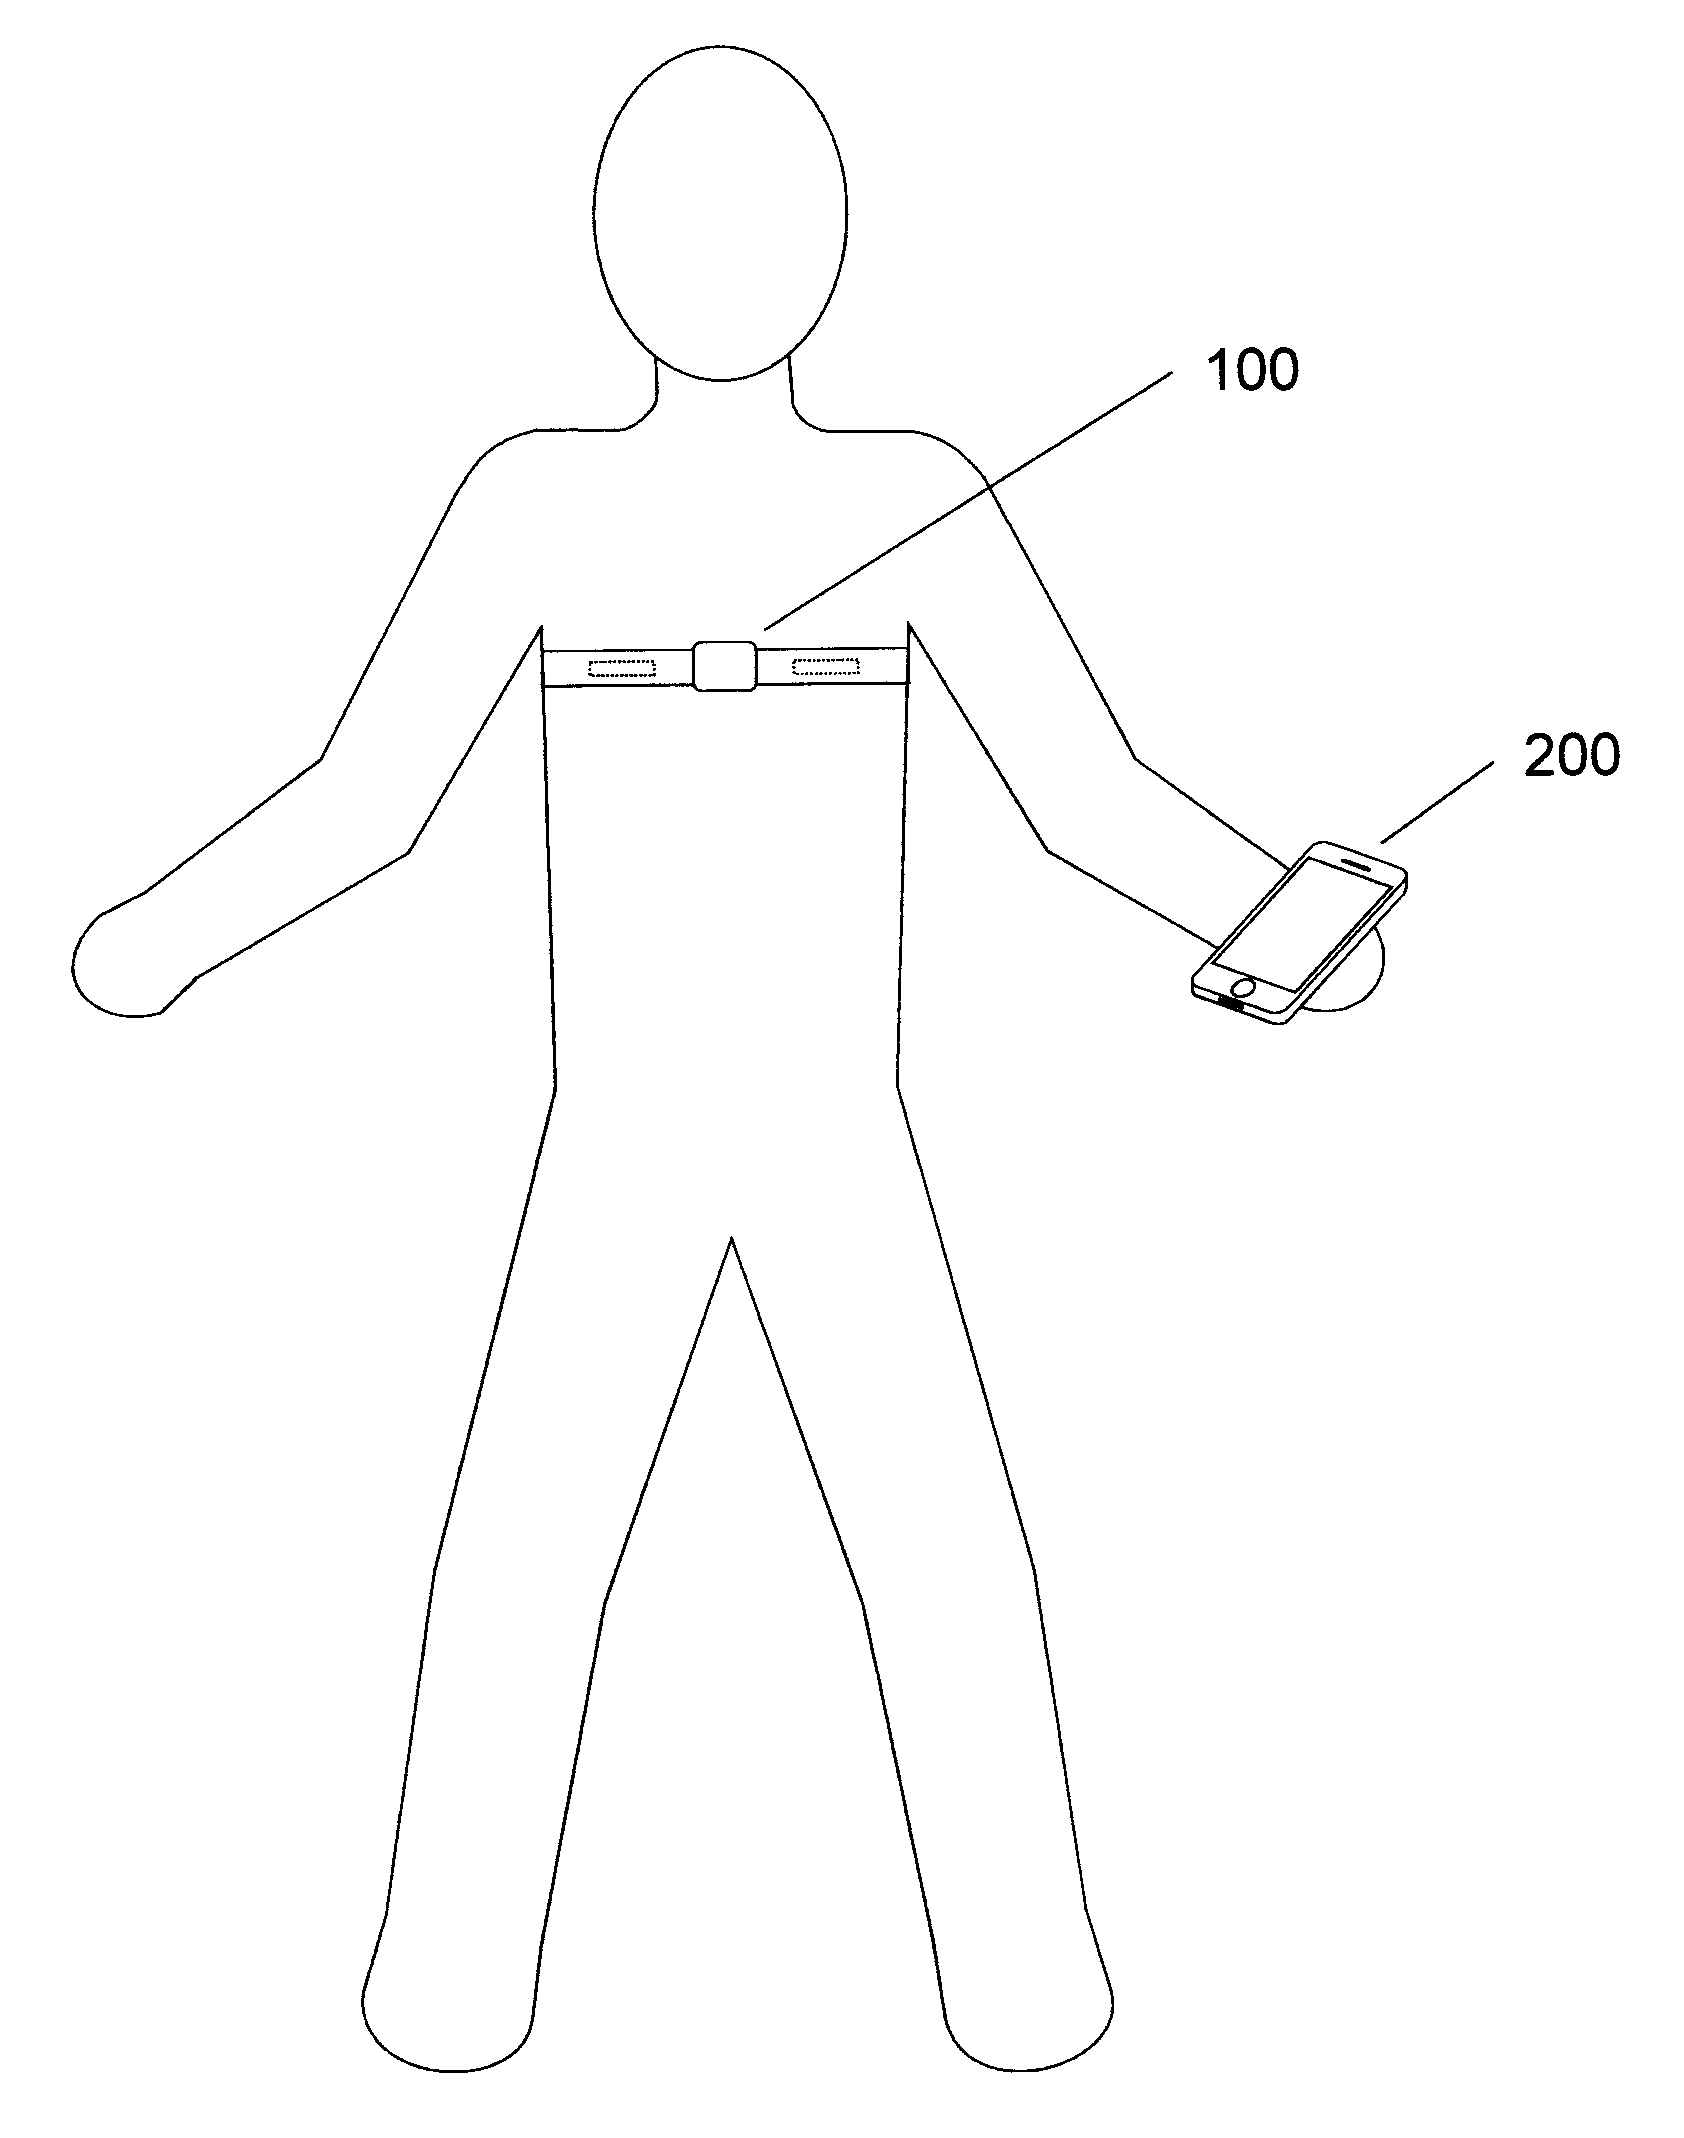 Mobile device system for measurement of cardiovascular health